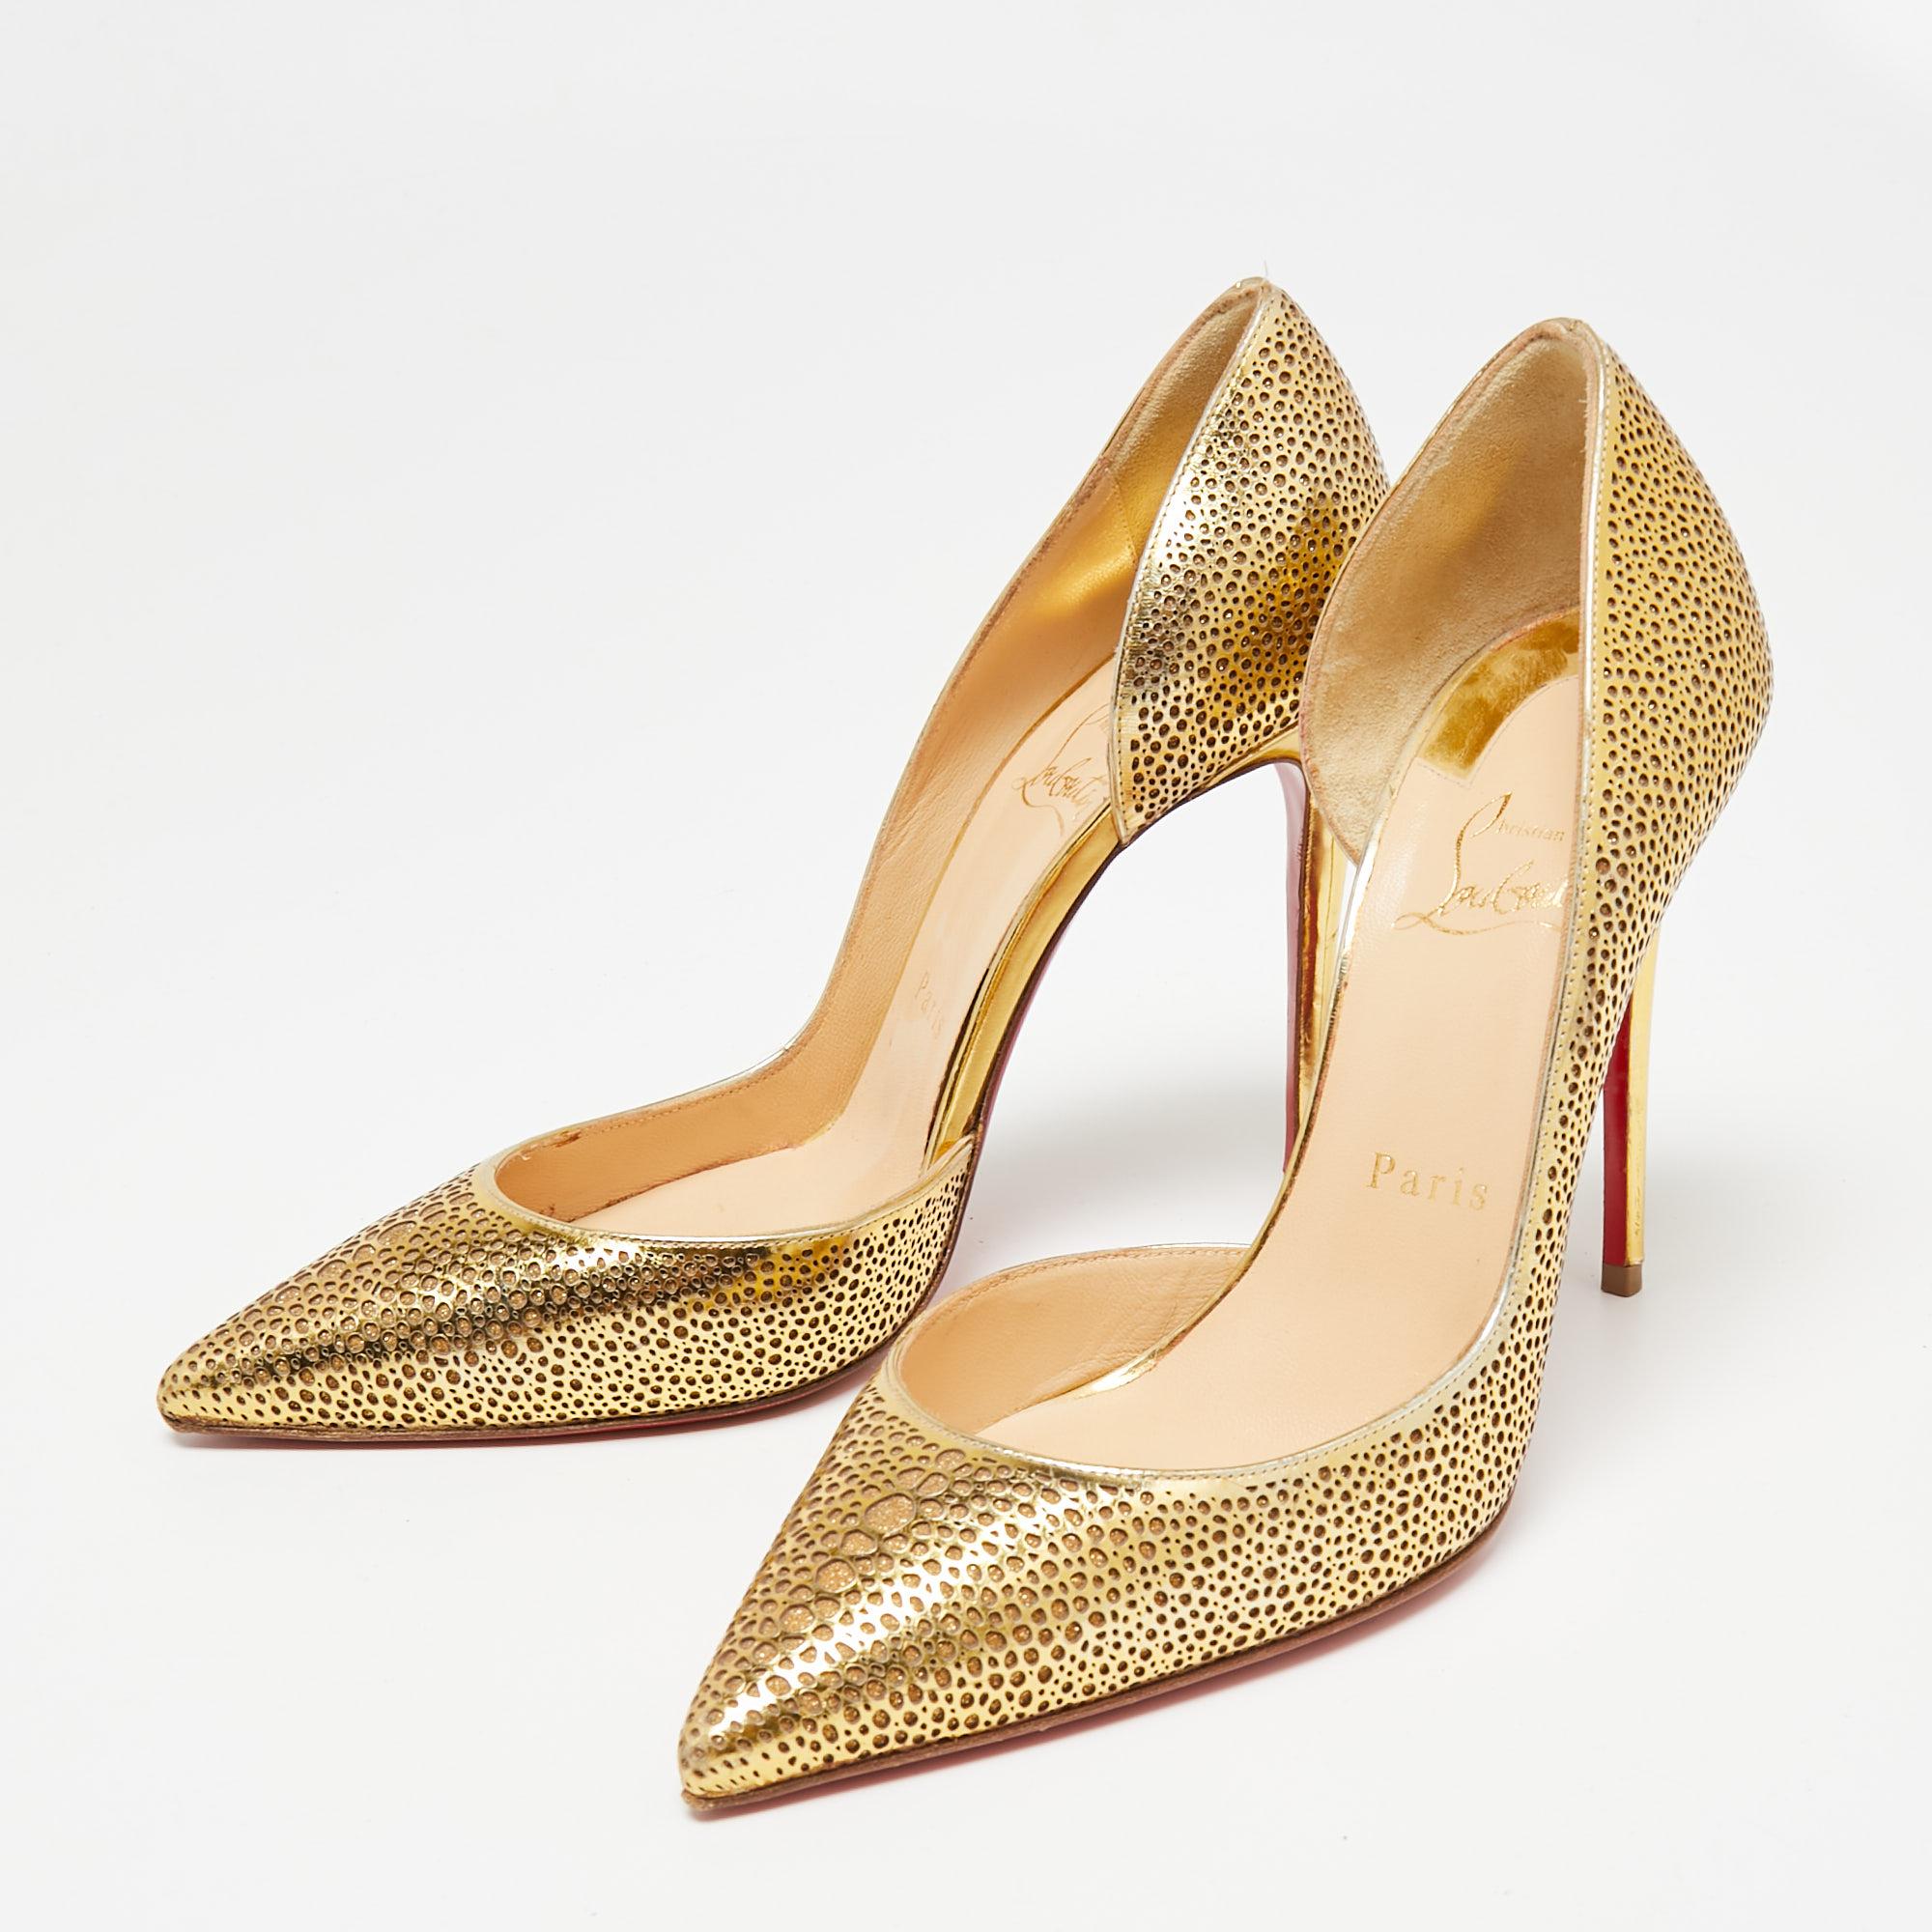 These curvaceous Christian Louboutin pumps are a timeless wardrobe staple. Crafted from luxurious material, they feature well-lined insoles that offer endless comfort.

